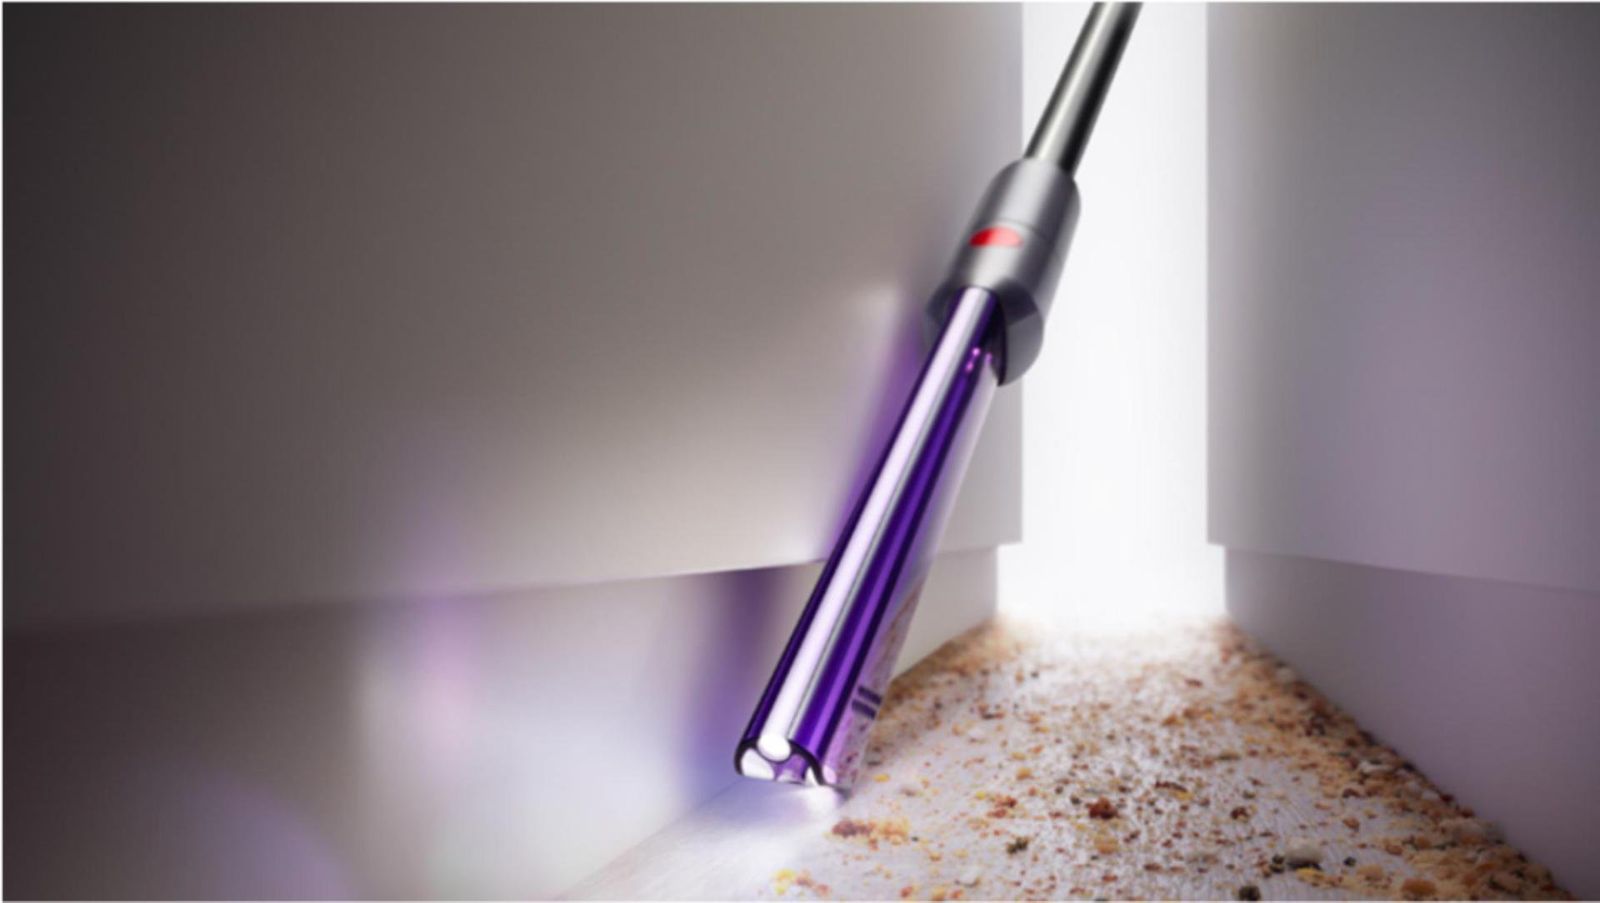 Dyson’s claim dismissed by EU General Court